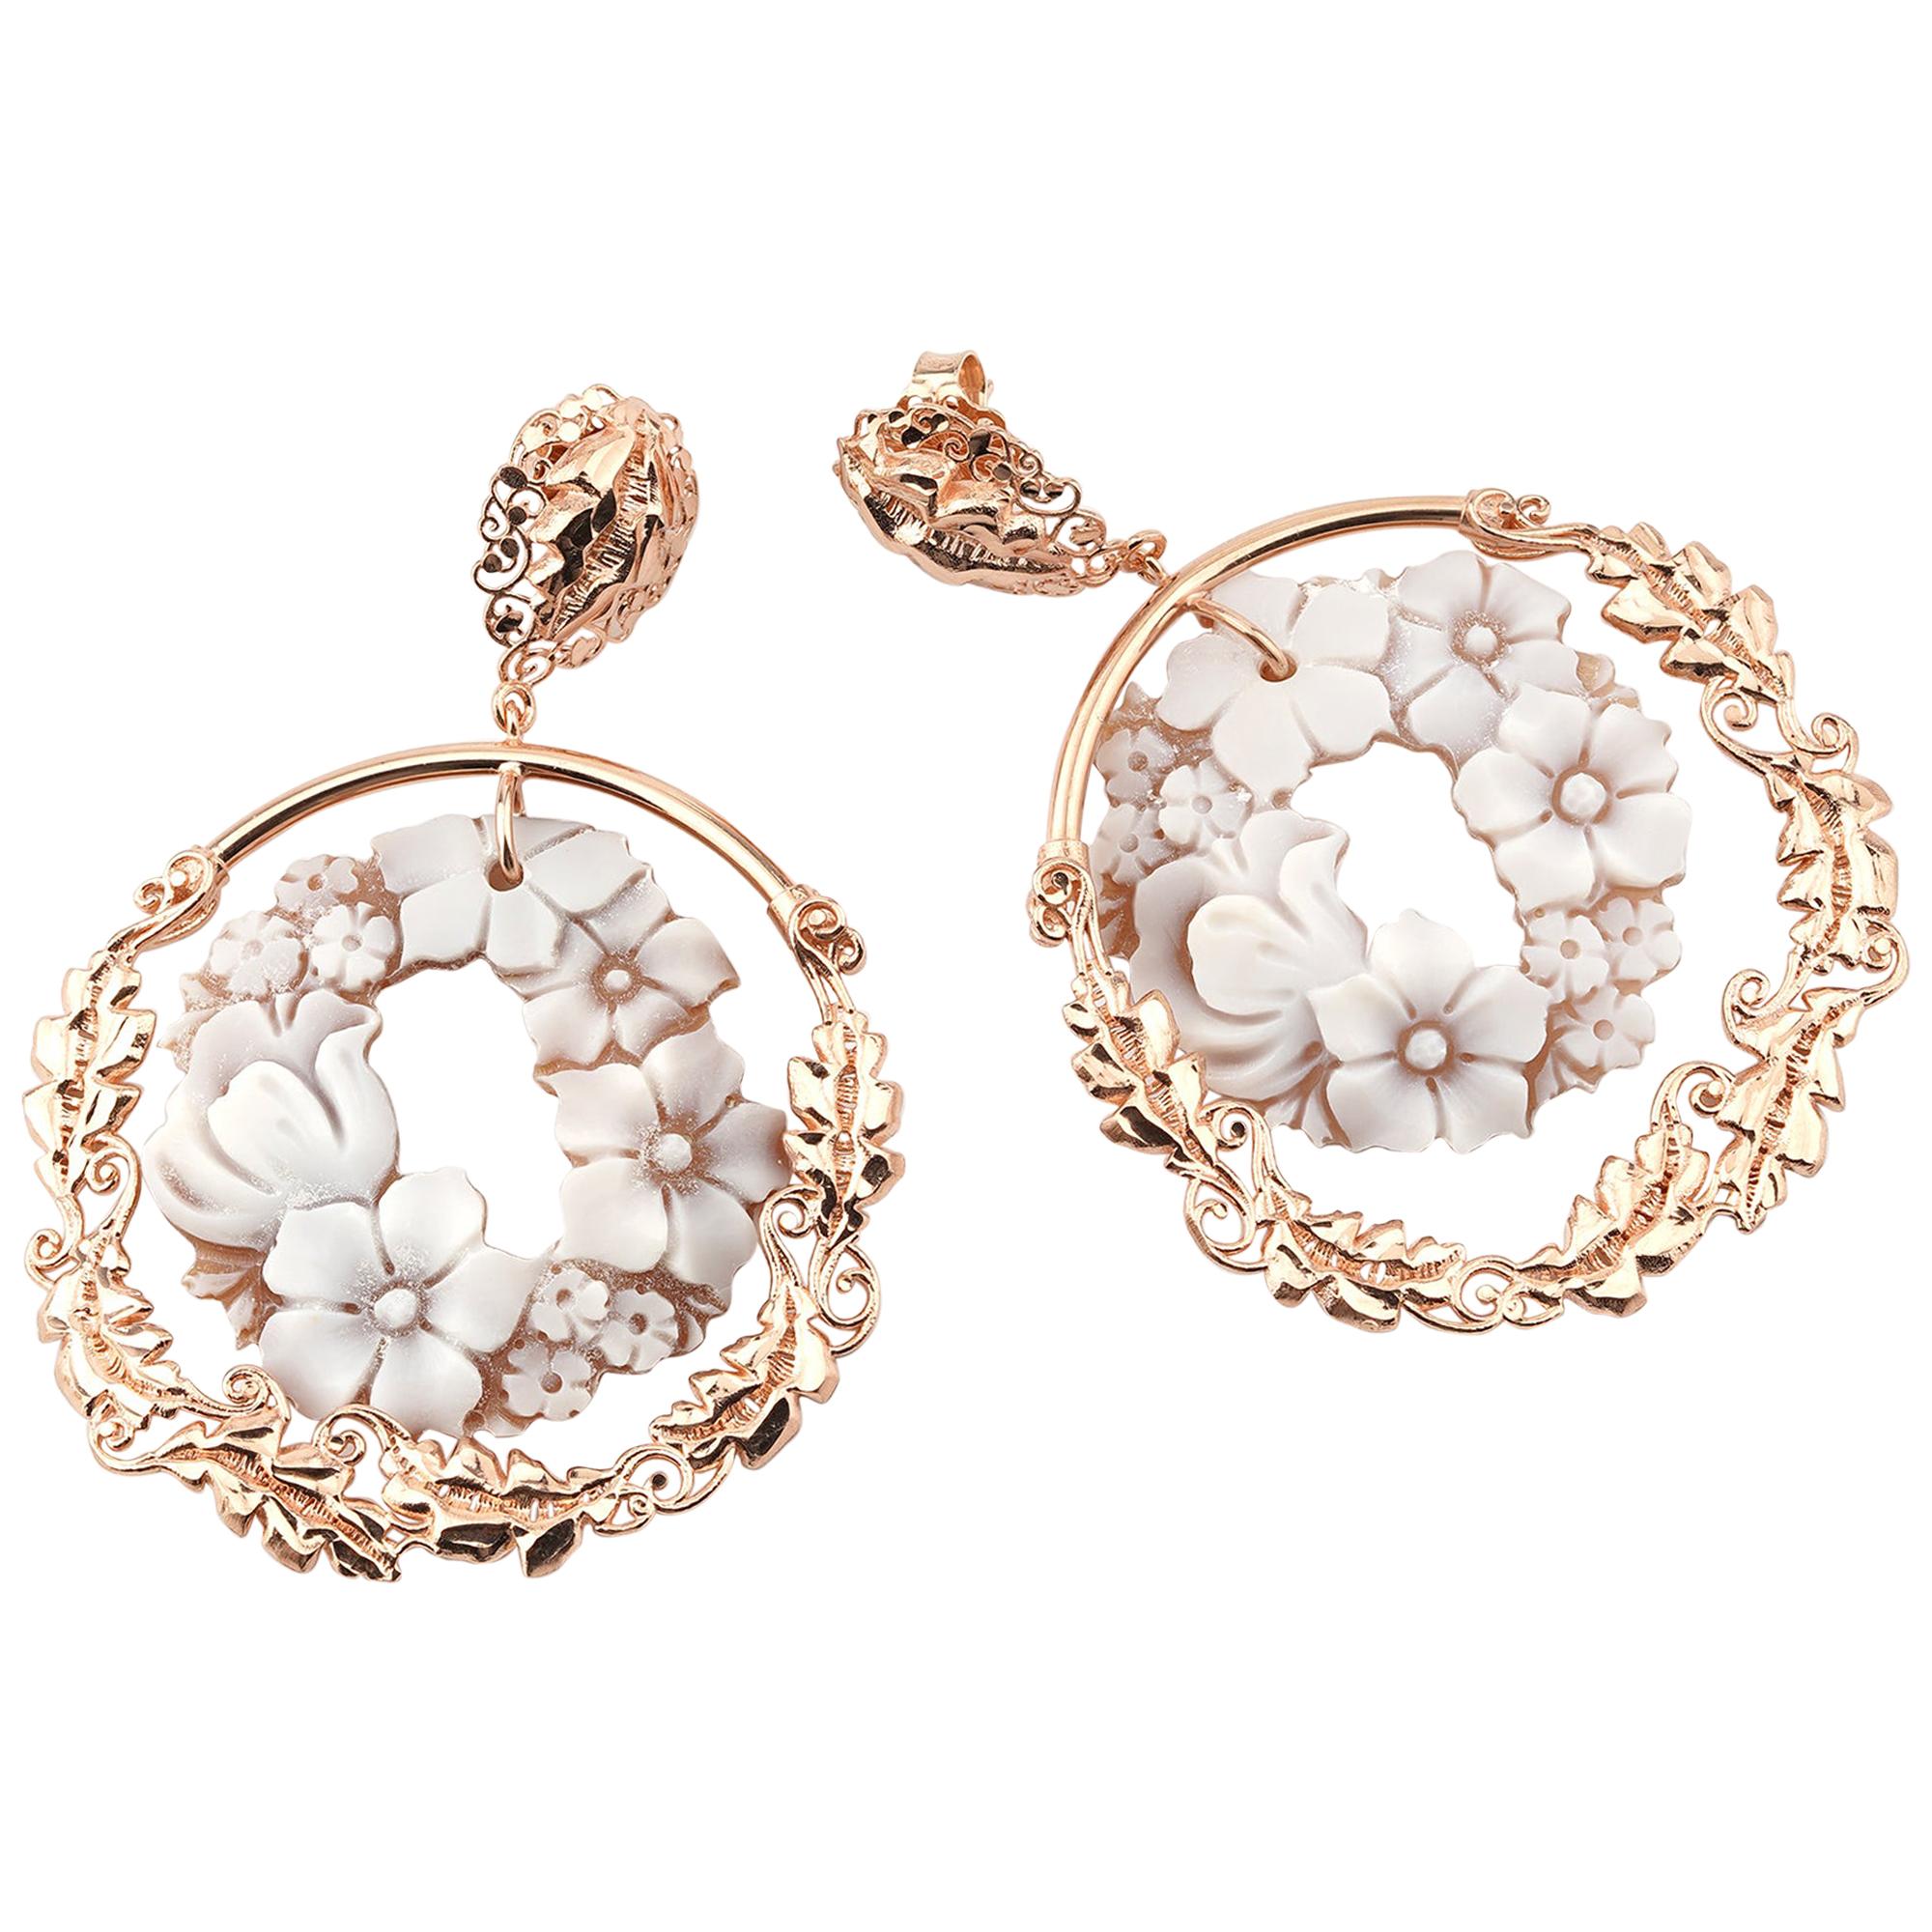 18 Carat Rose Gold-Plated 925 Sterling Silver Sea Shell Cameo Earrings